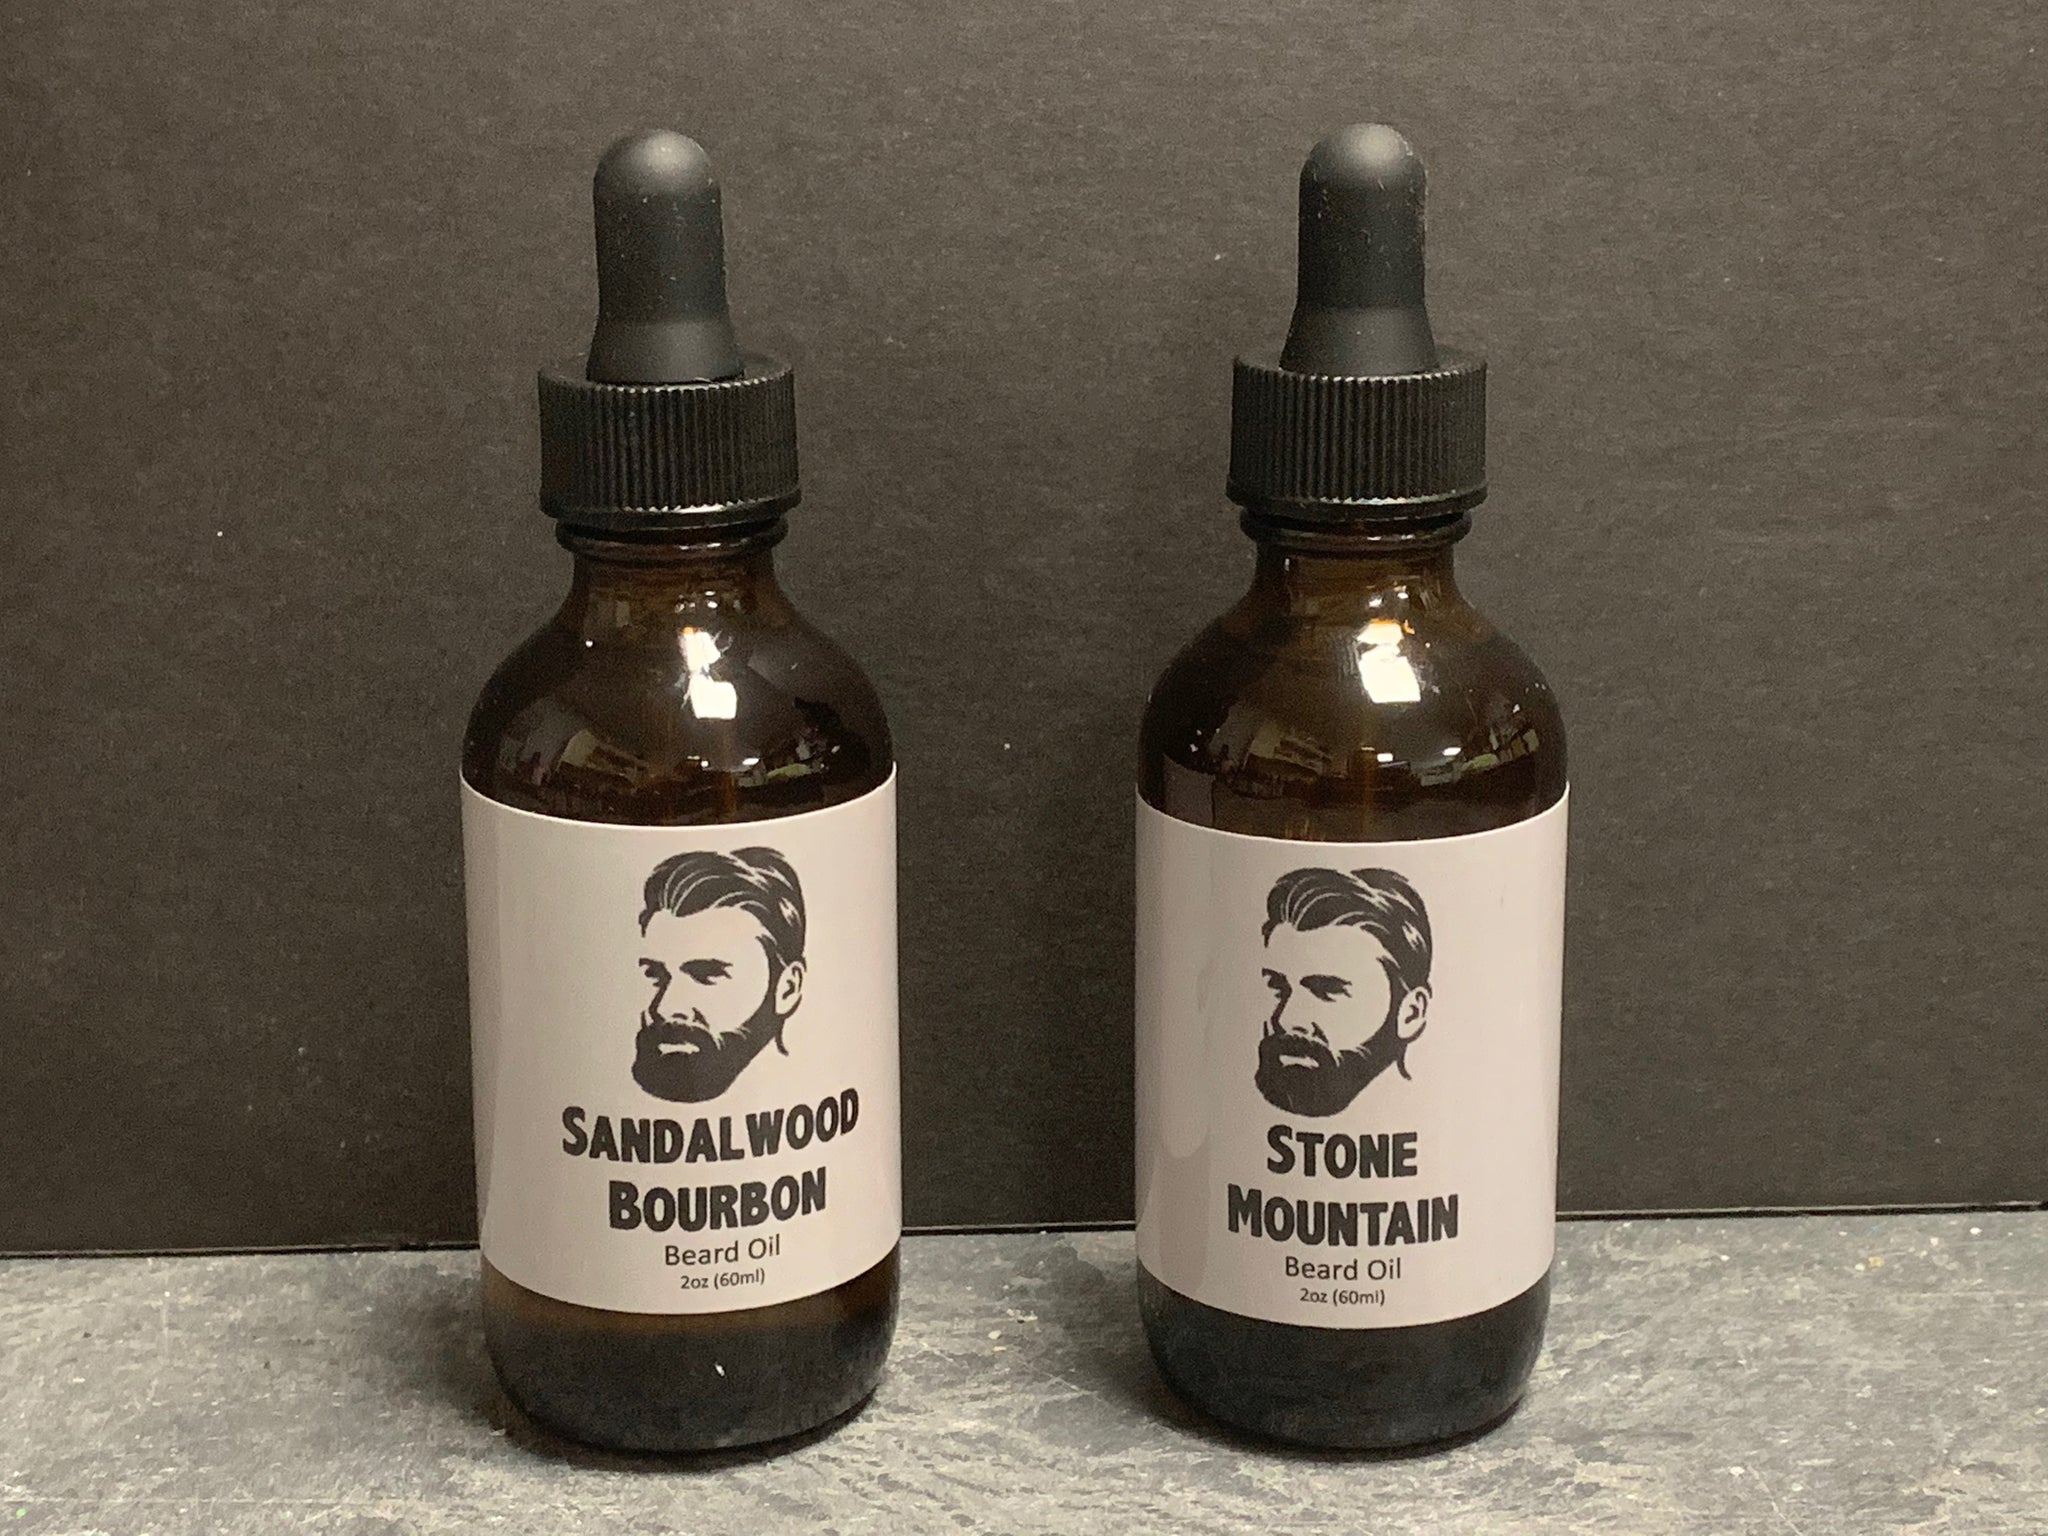 BEARD OIL for the gents